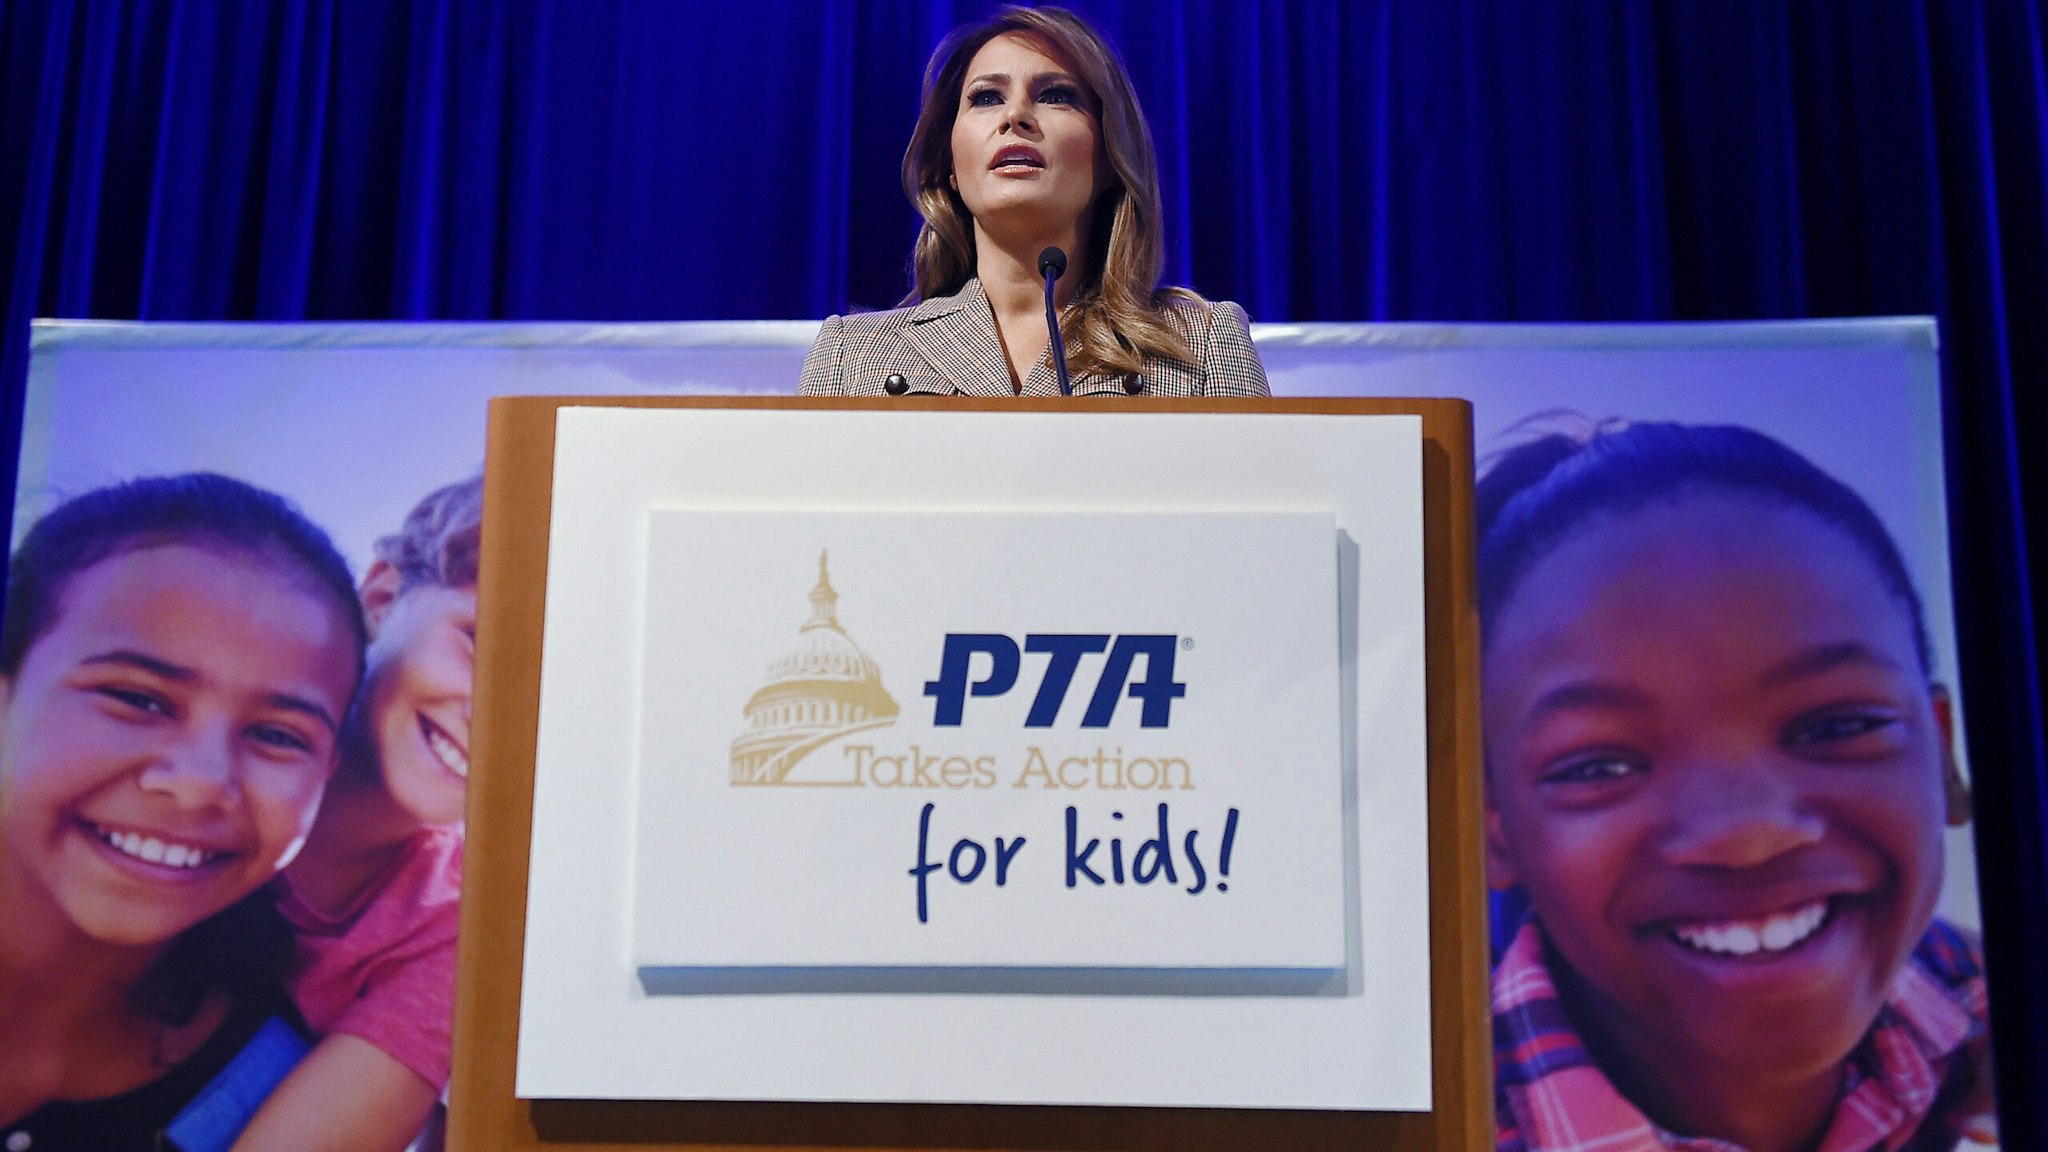 First Lady Melania Trump addresses the 2020 National Parent Teacher Association (PTA) Legislative Conference at the Westin Alexandria Old Town on March 10, 2020 in Alexandria, Virginia. (Photo by Olivier DOULIERY / AFP) (Photo by OLIVIER DOULIERY/AFP via Getty Images)